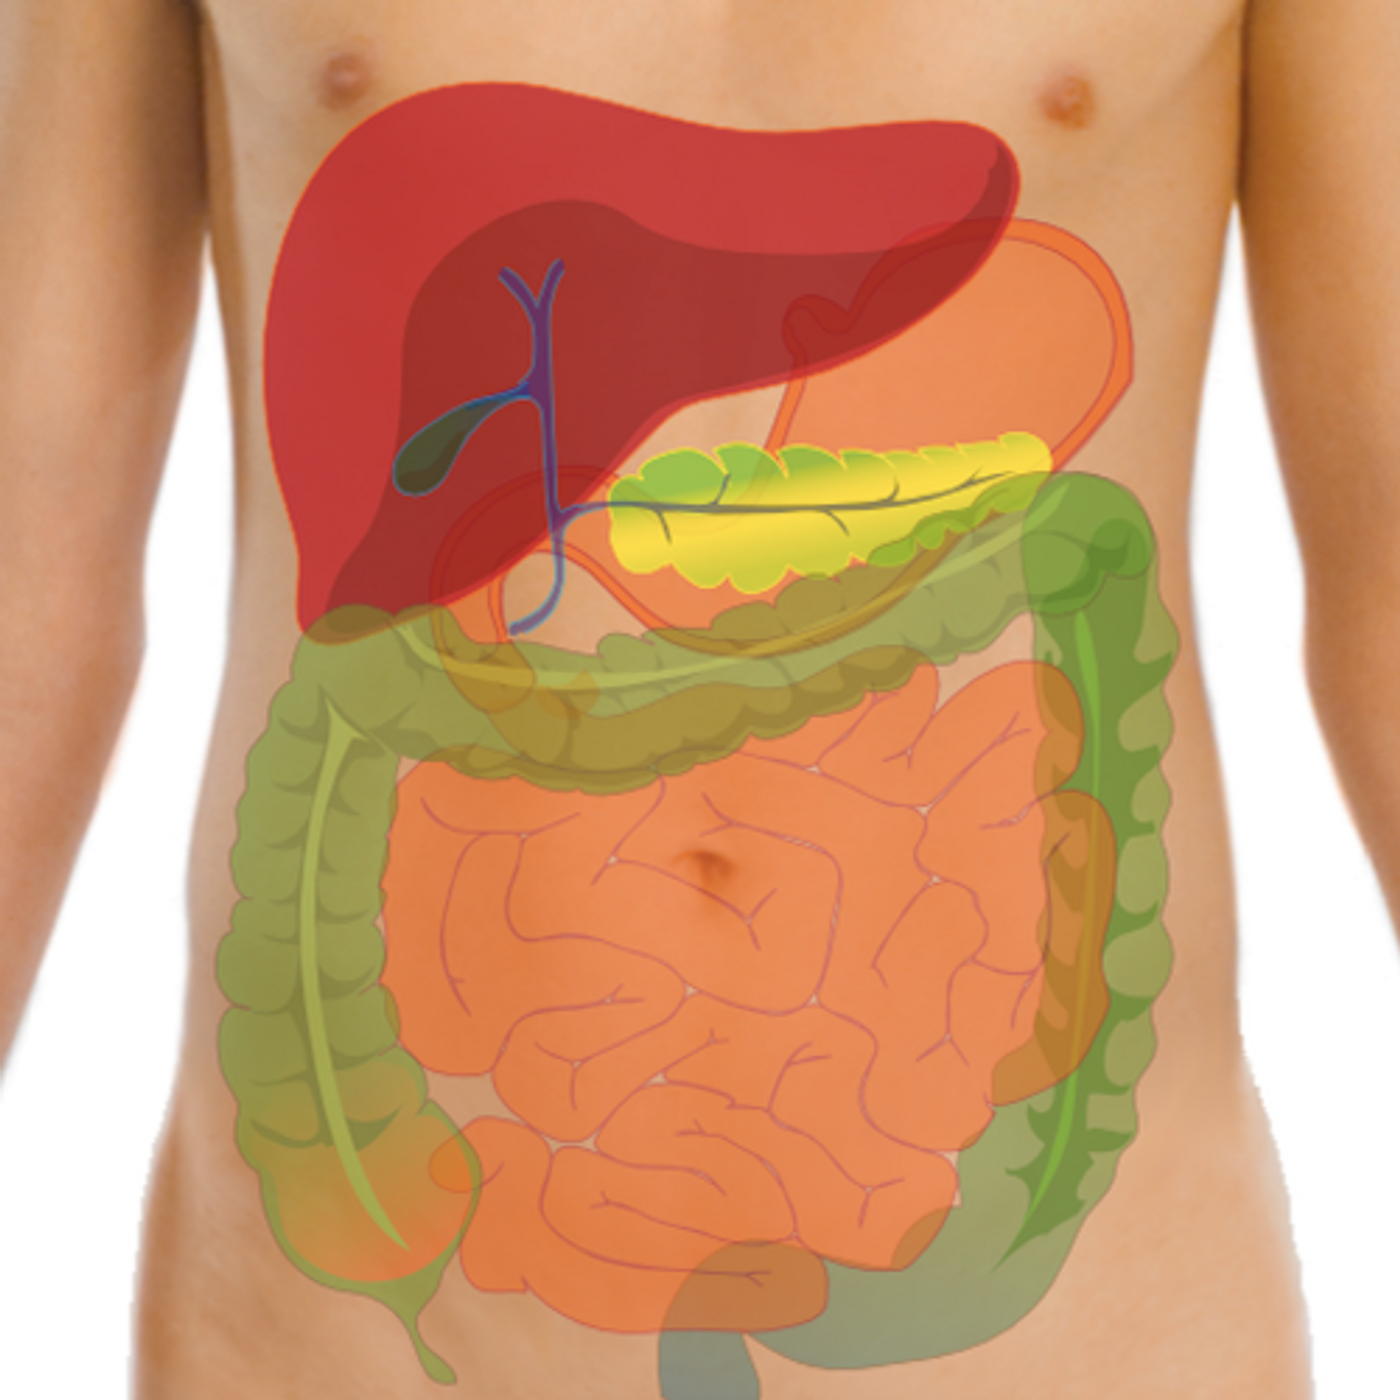 The gut microbes in our GI tract is connected to our health. / Image credit: Wikimedia Commons/Mikael Häggström